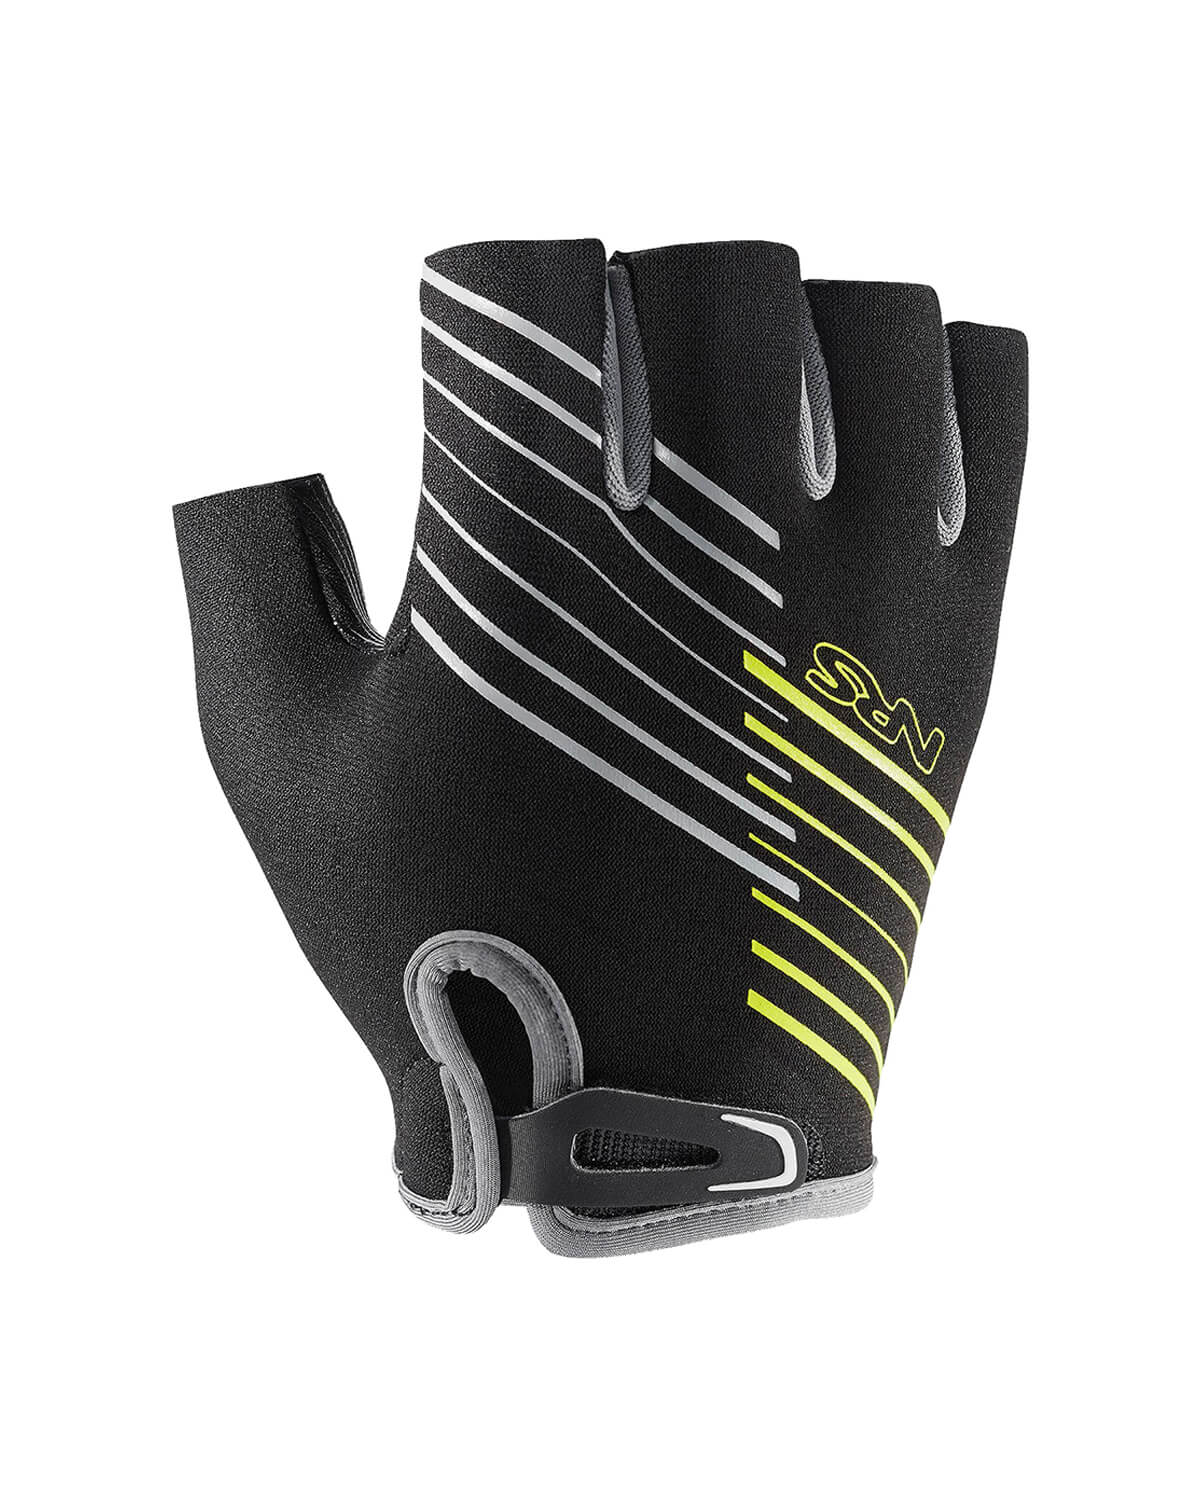 1.5mm NRS Guide Gloves